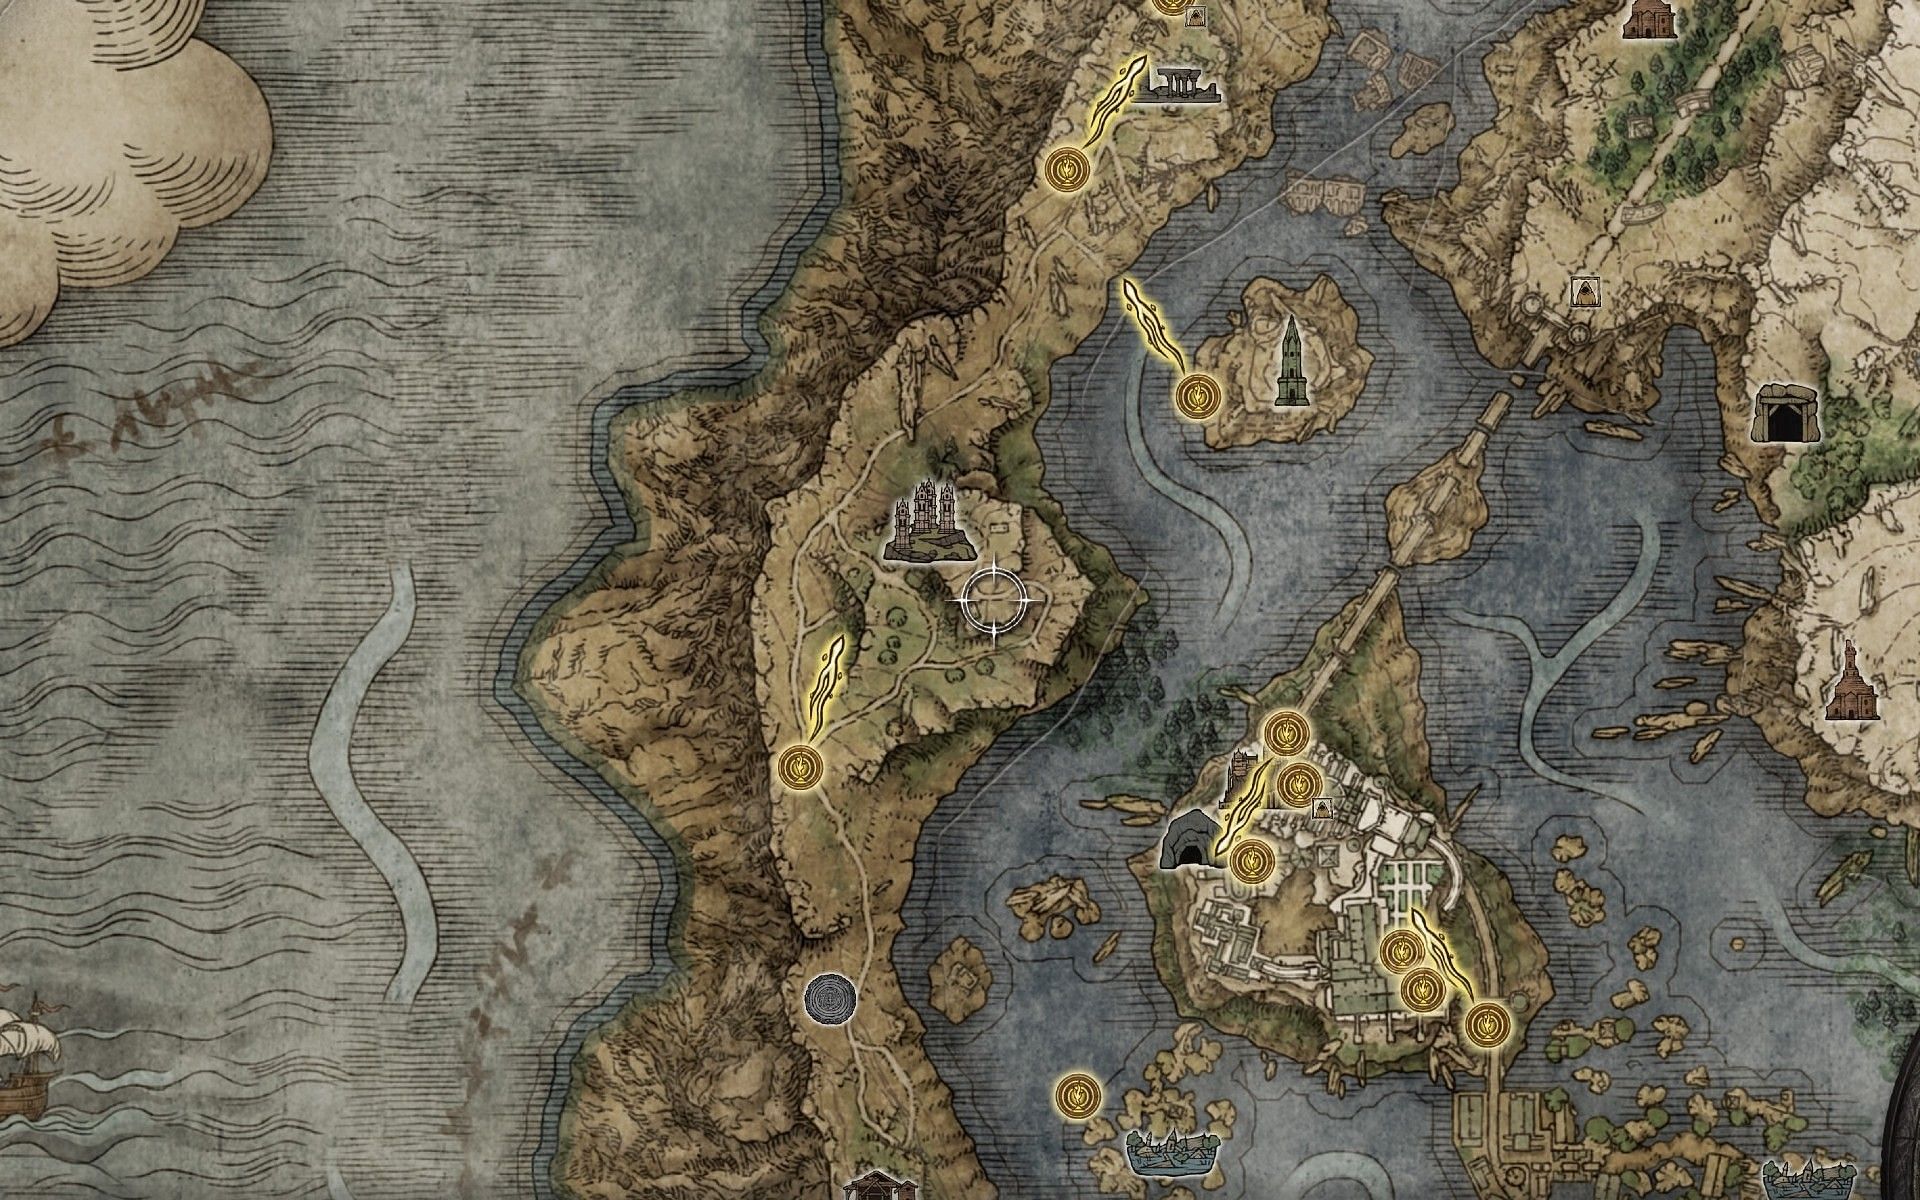 How to Reach the Starting Location in Elden Ring